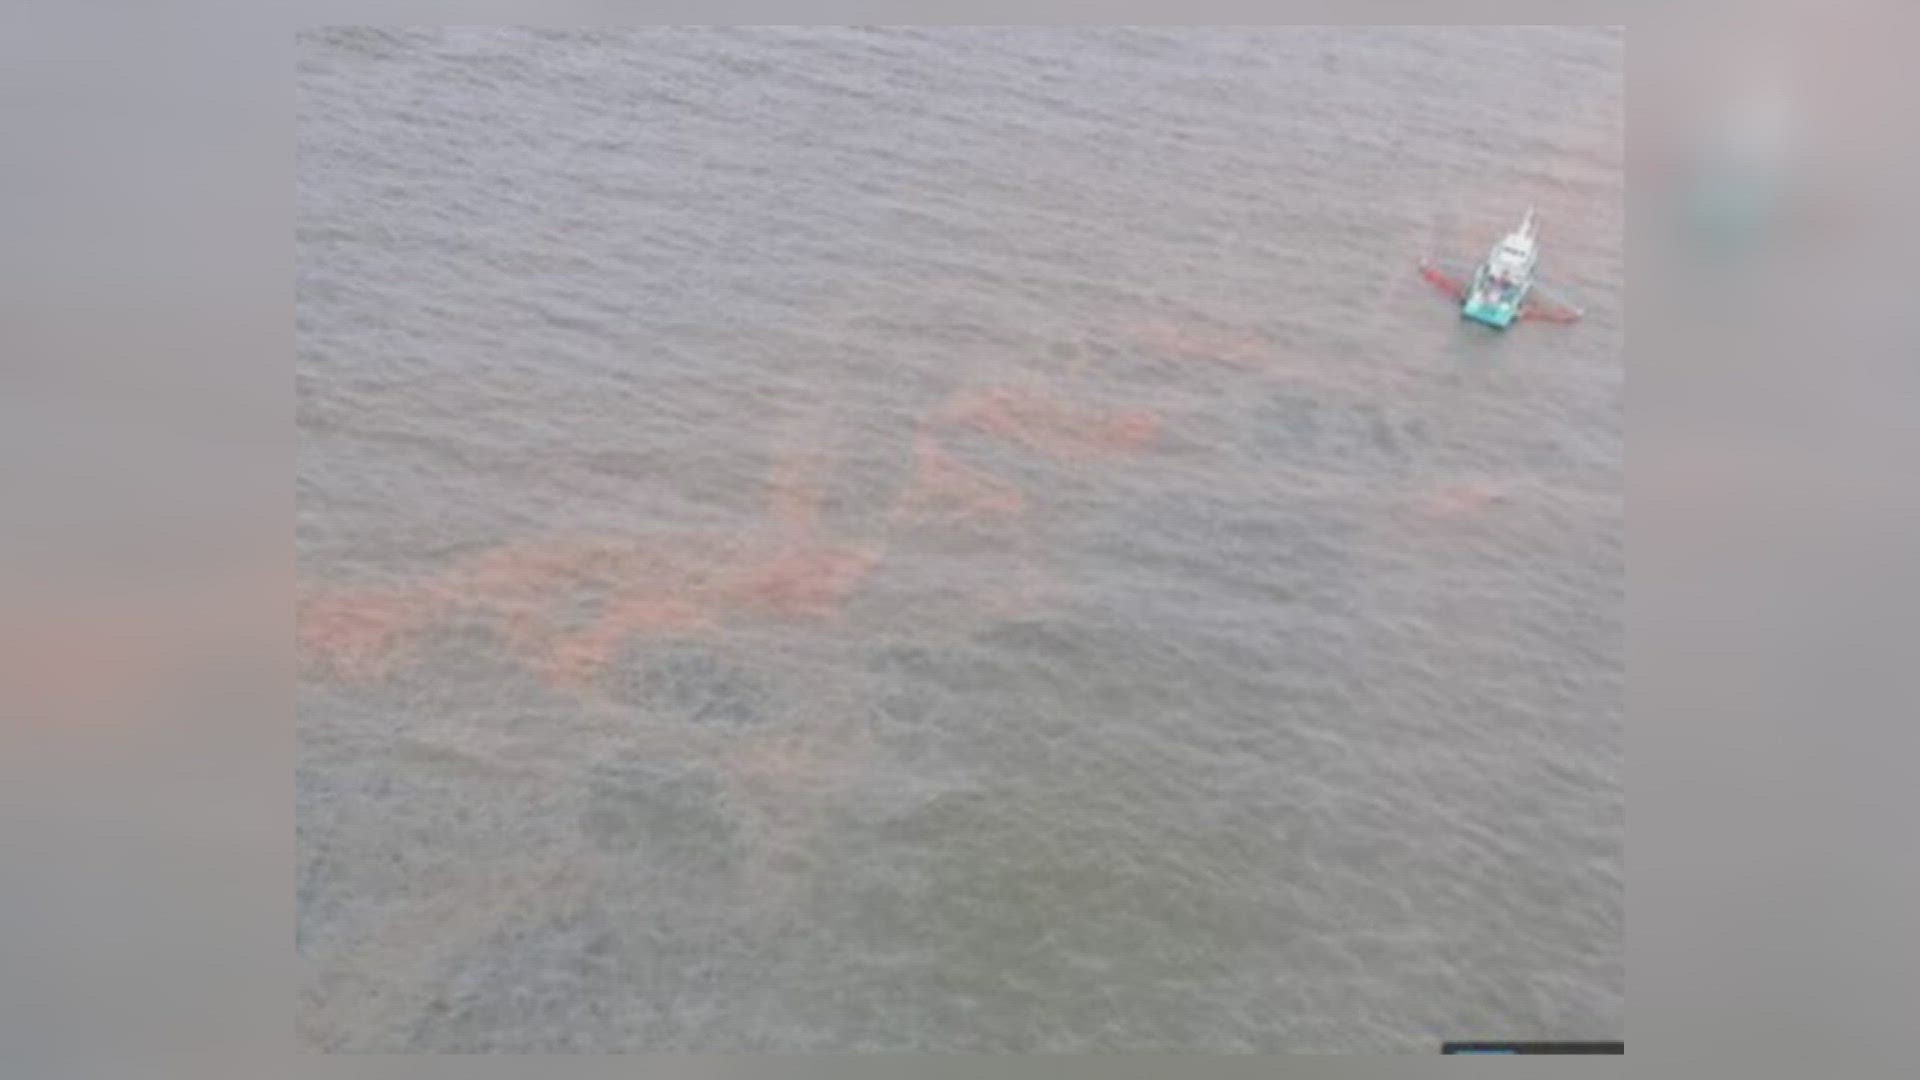 The U.S. Coast Guard said the source was a pipeline owned by Texas Petroleum Investment Company. They said nearly 1,000 gallons of oil spilled.